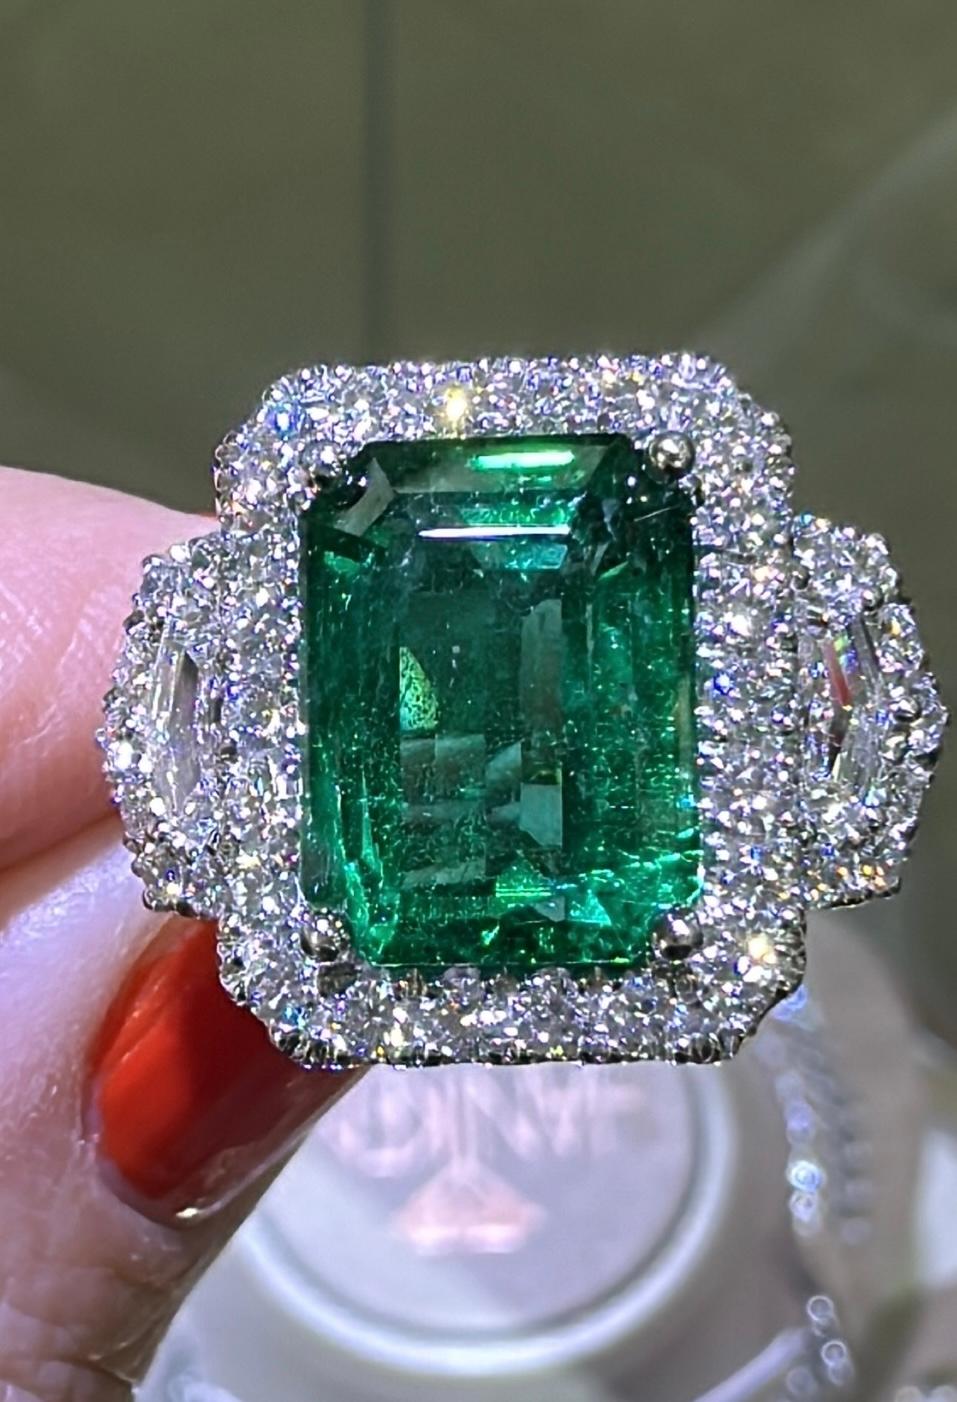 This gorgeous GRS-certified statement ring will make a lasting impression with its show-stopping 5.47-carat Zambian emerald center stone and dazzling diamond accents. This ring is a timeless treasure and a perfect way to express your bold